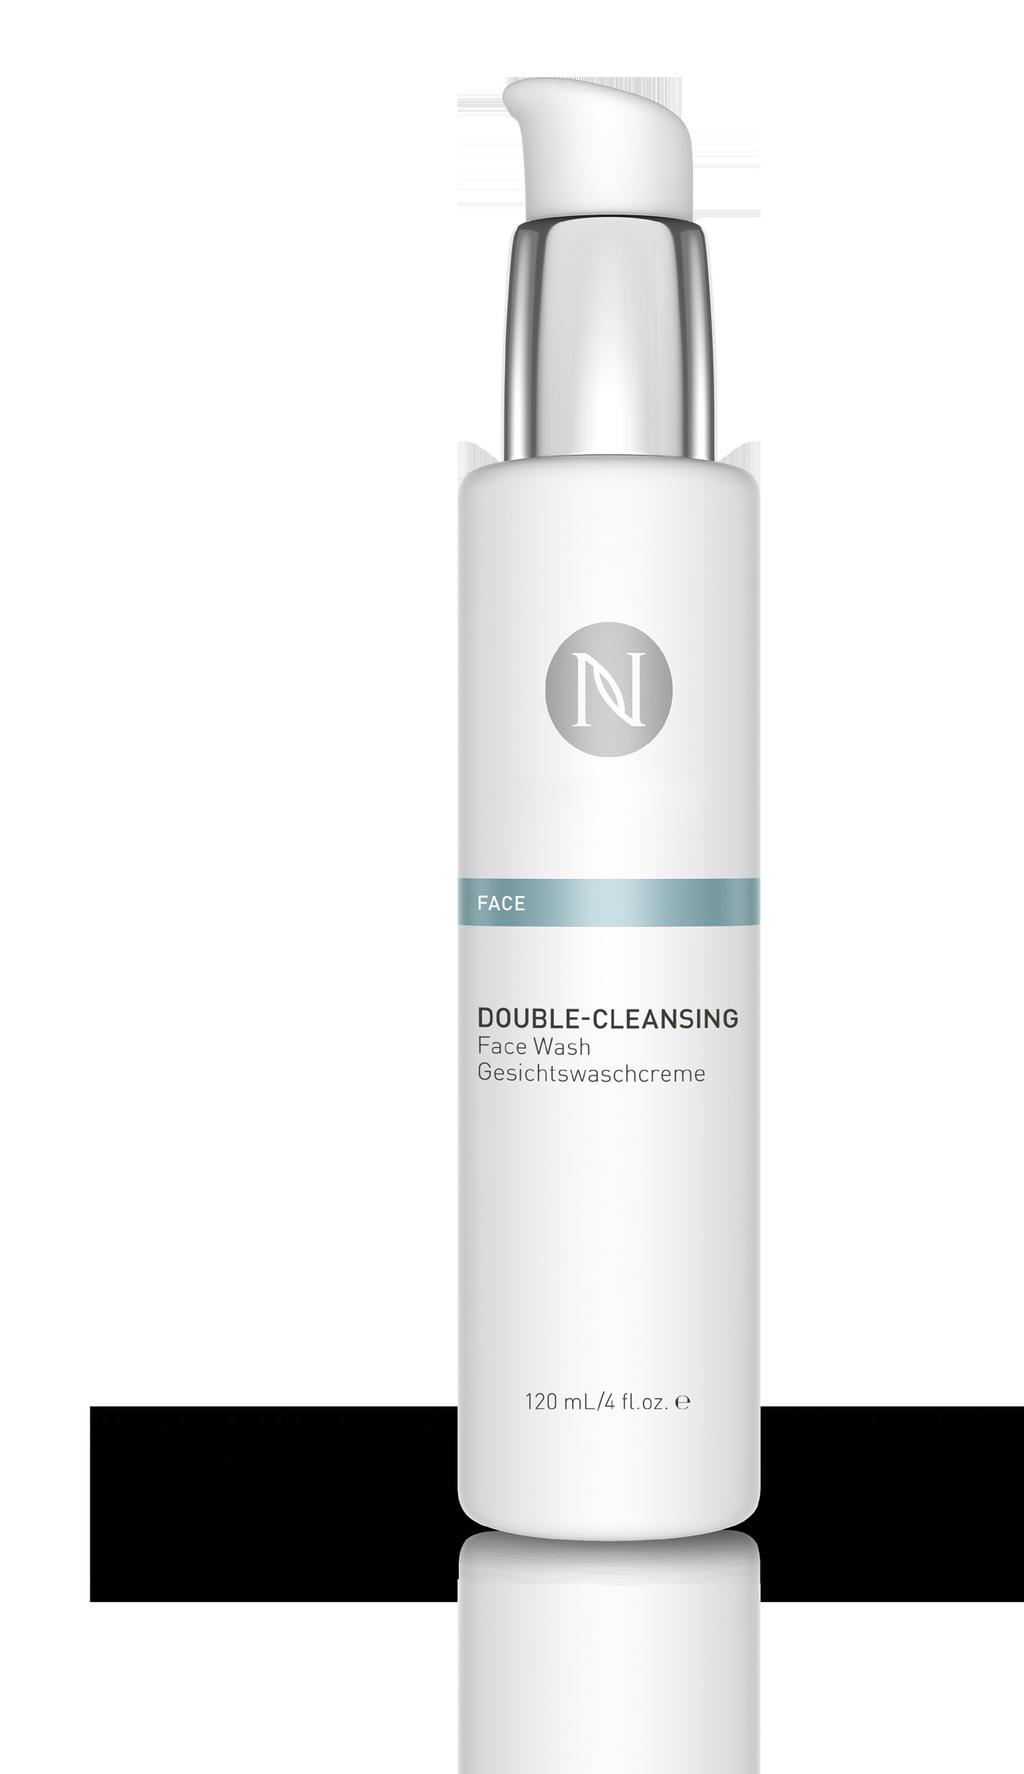 Double-Cleansing Face Wash OIL AND WER DO MIX A GENTLE, EFFECTIVE DUAL-ACTION CLEAN Our advanced, lightweight Face Wash is the fresh way to start and end your day.